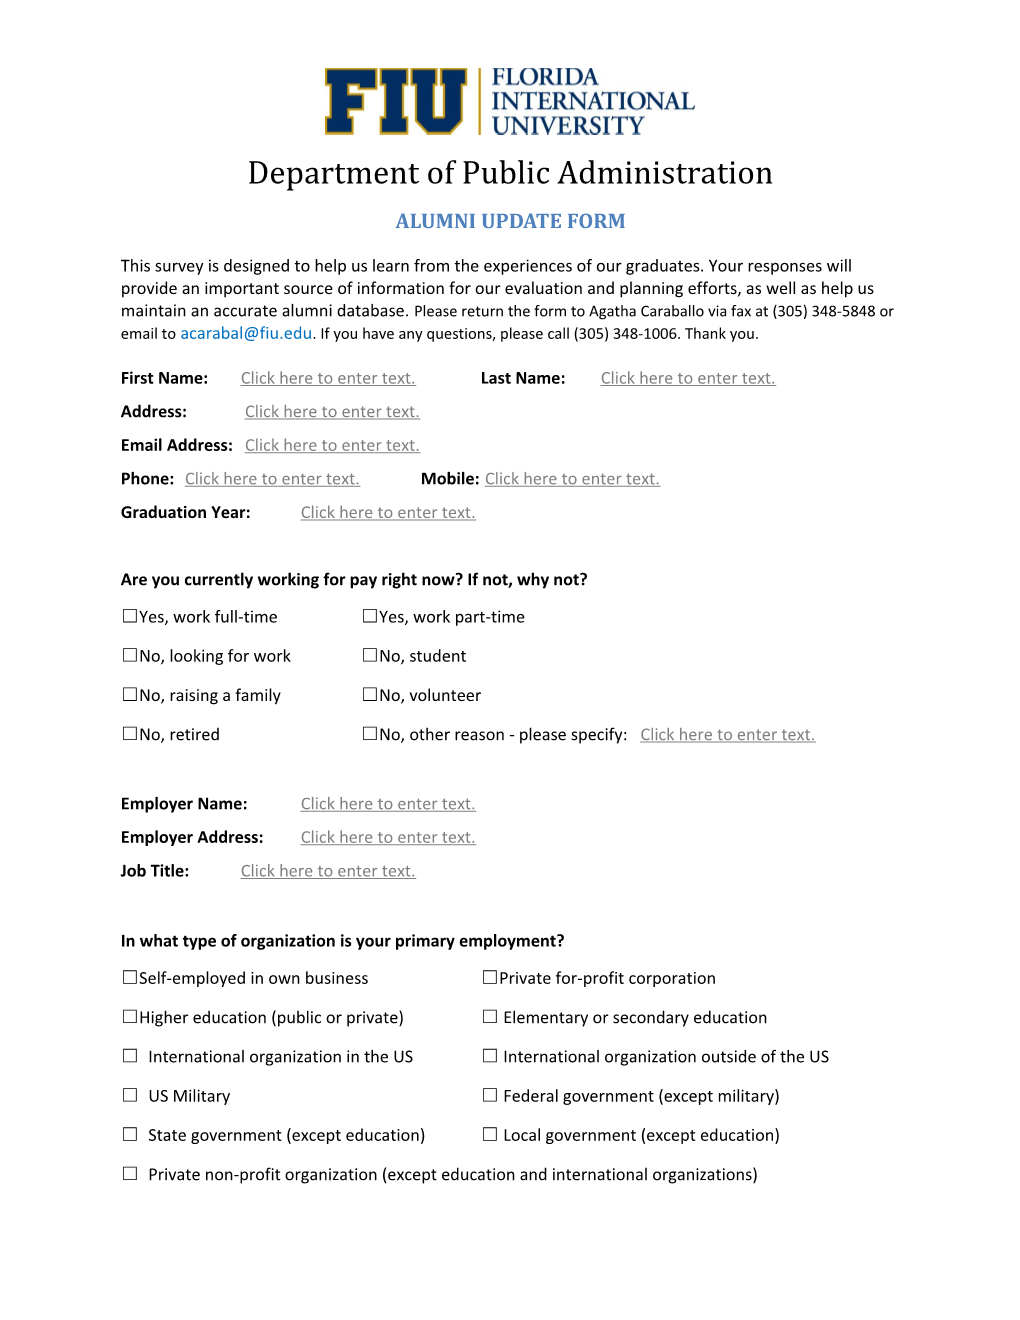 Department of Public Administration s1